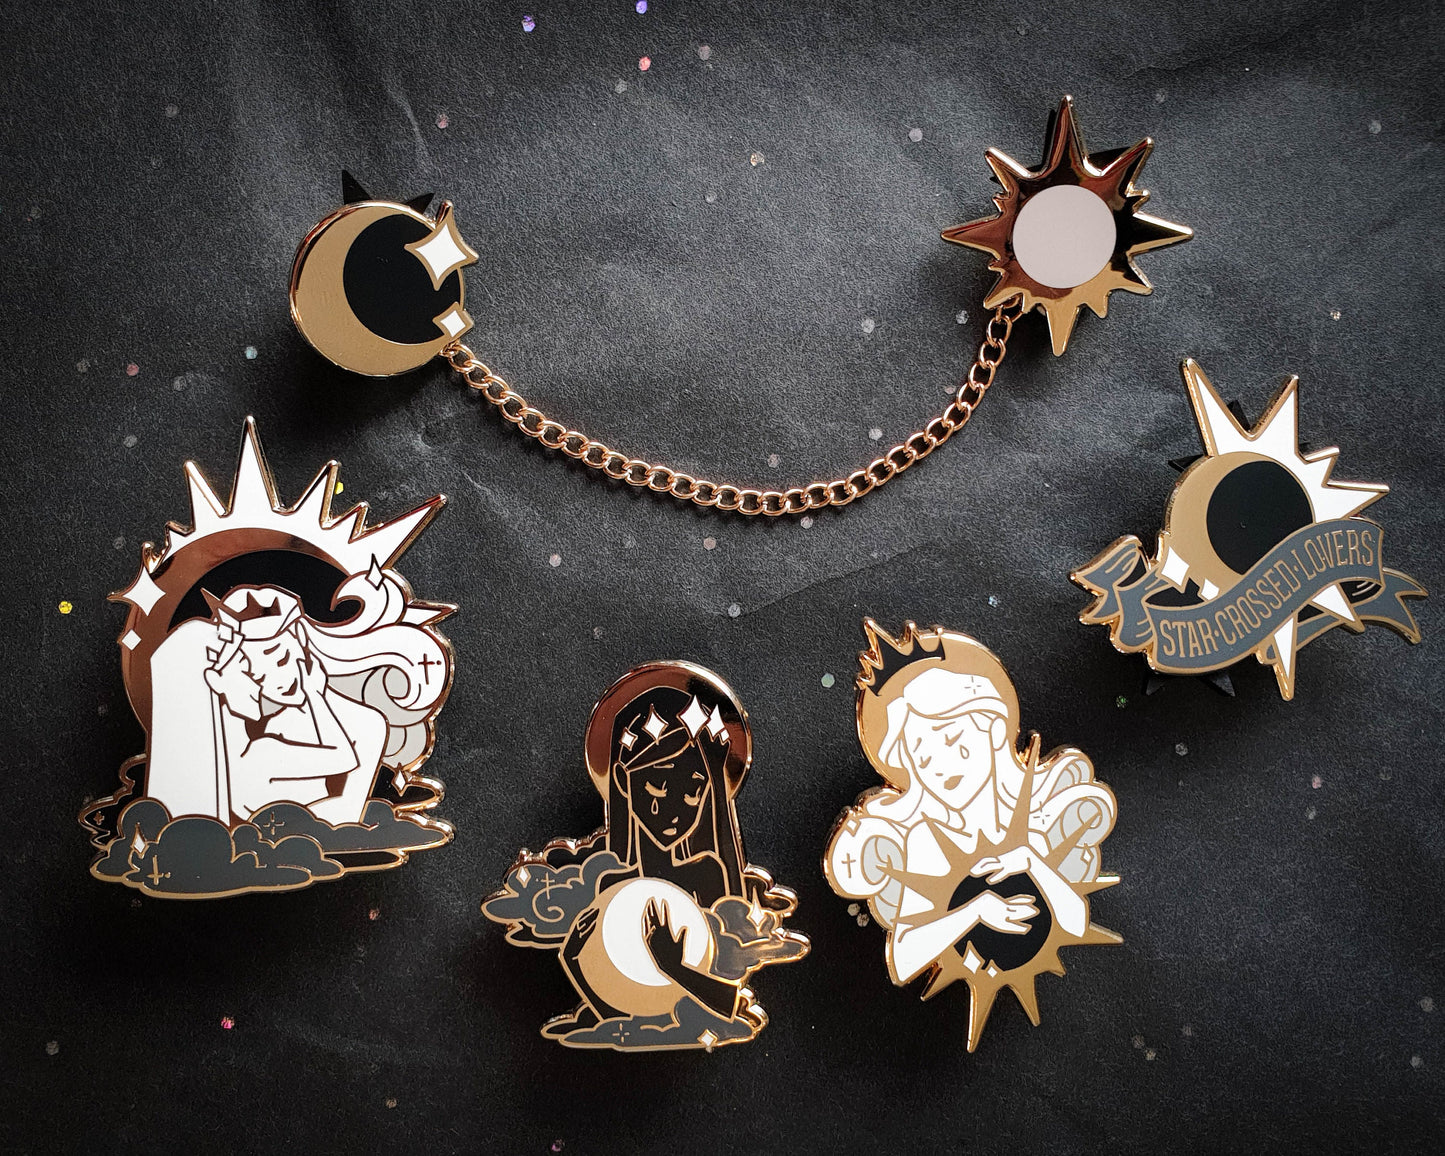 The Moon - Hard Enamel Pin - Star-crossed Lovers (Collaboration by Astermorn and Annadrawsstuff)